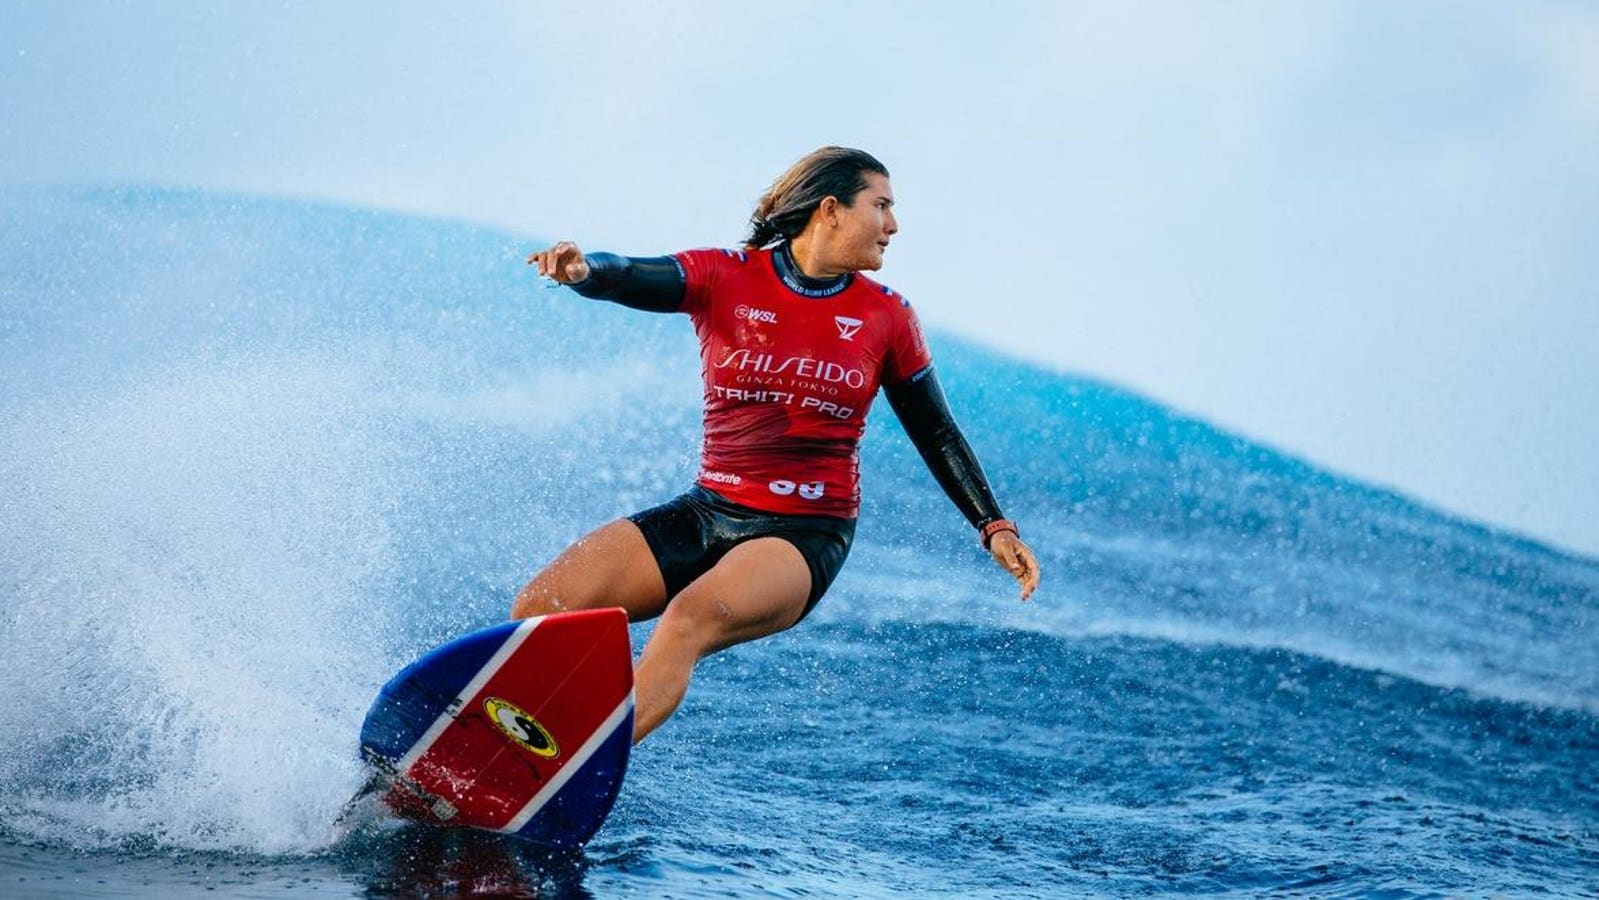 How Eventbrite And The WSL Are Elevating Women In Surfing